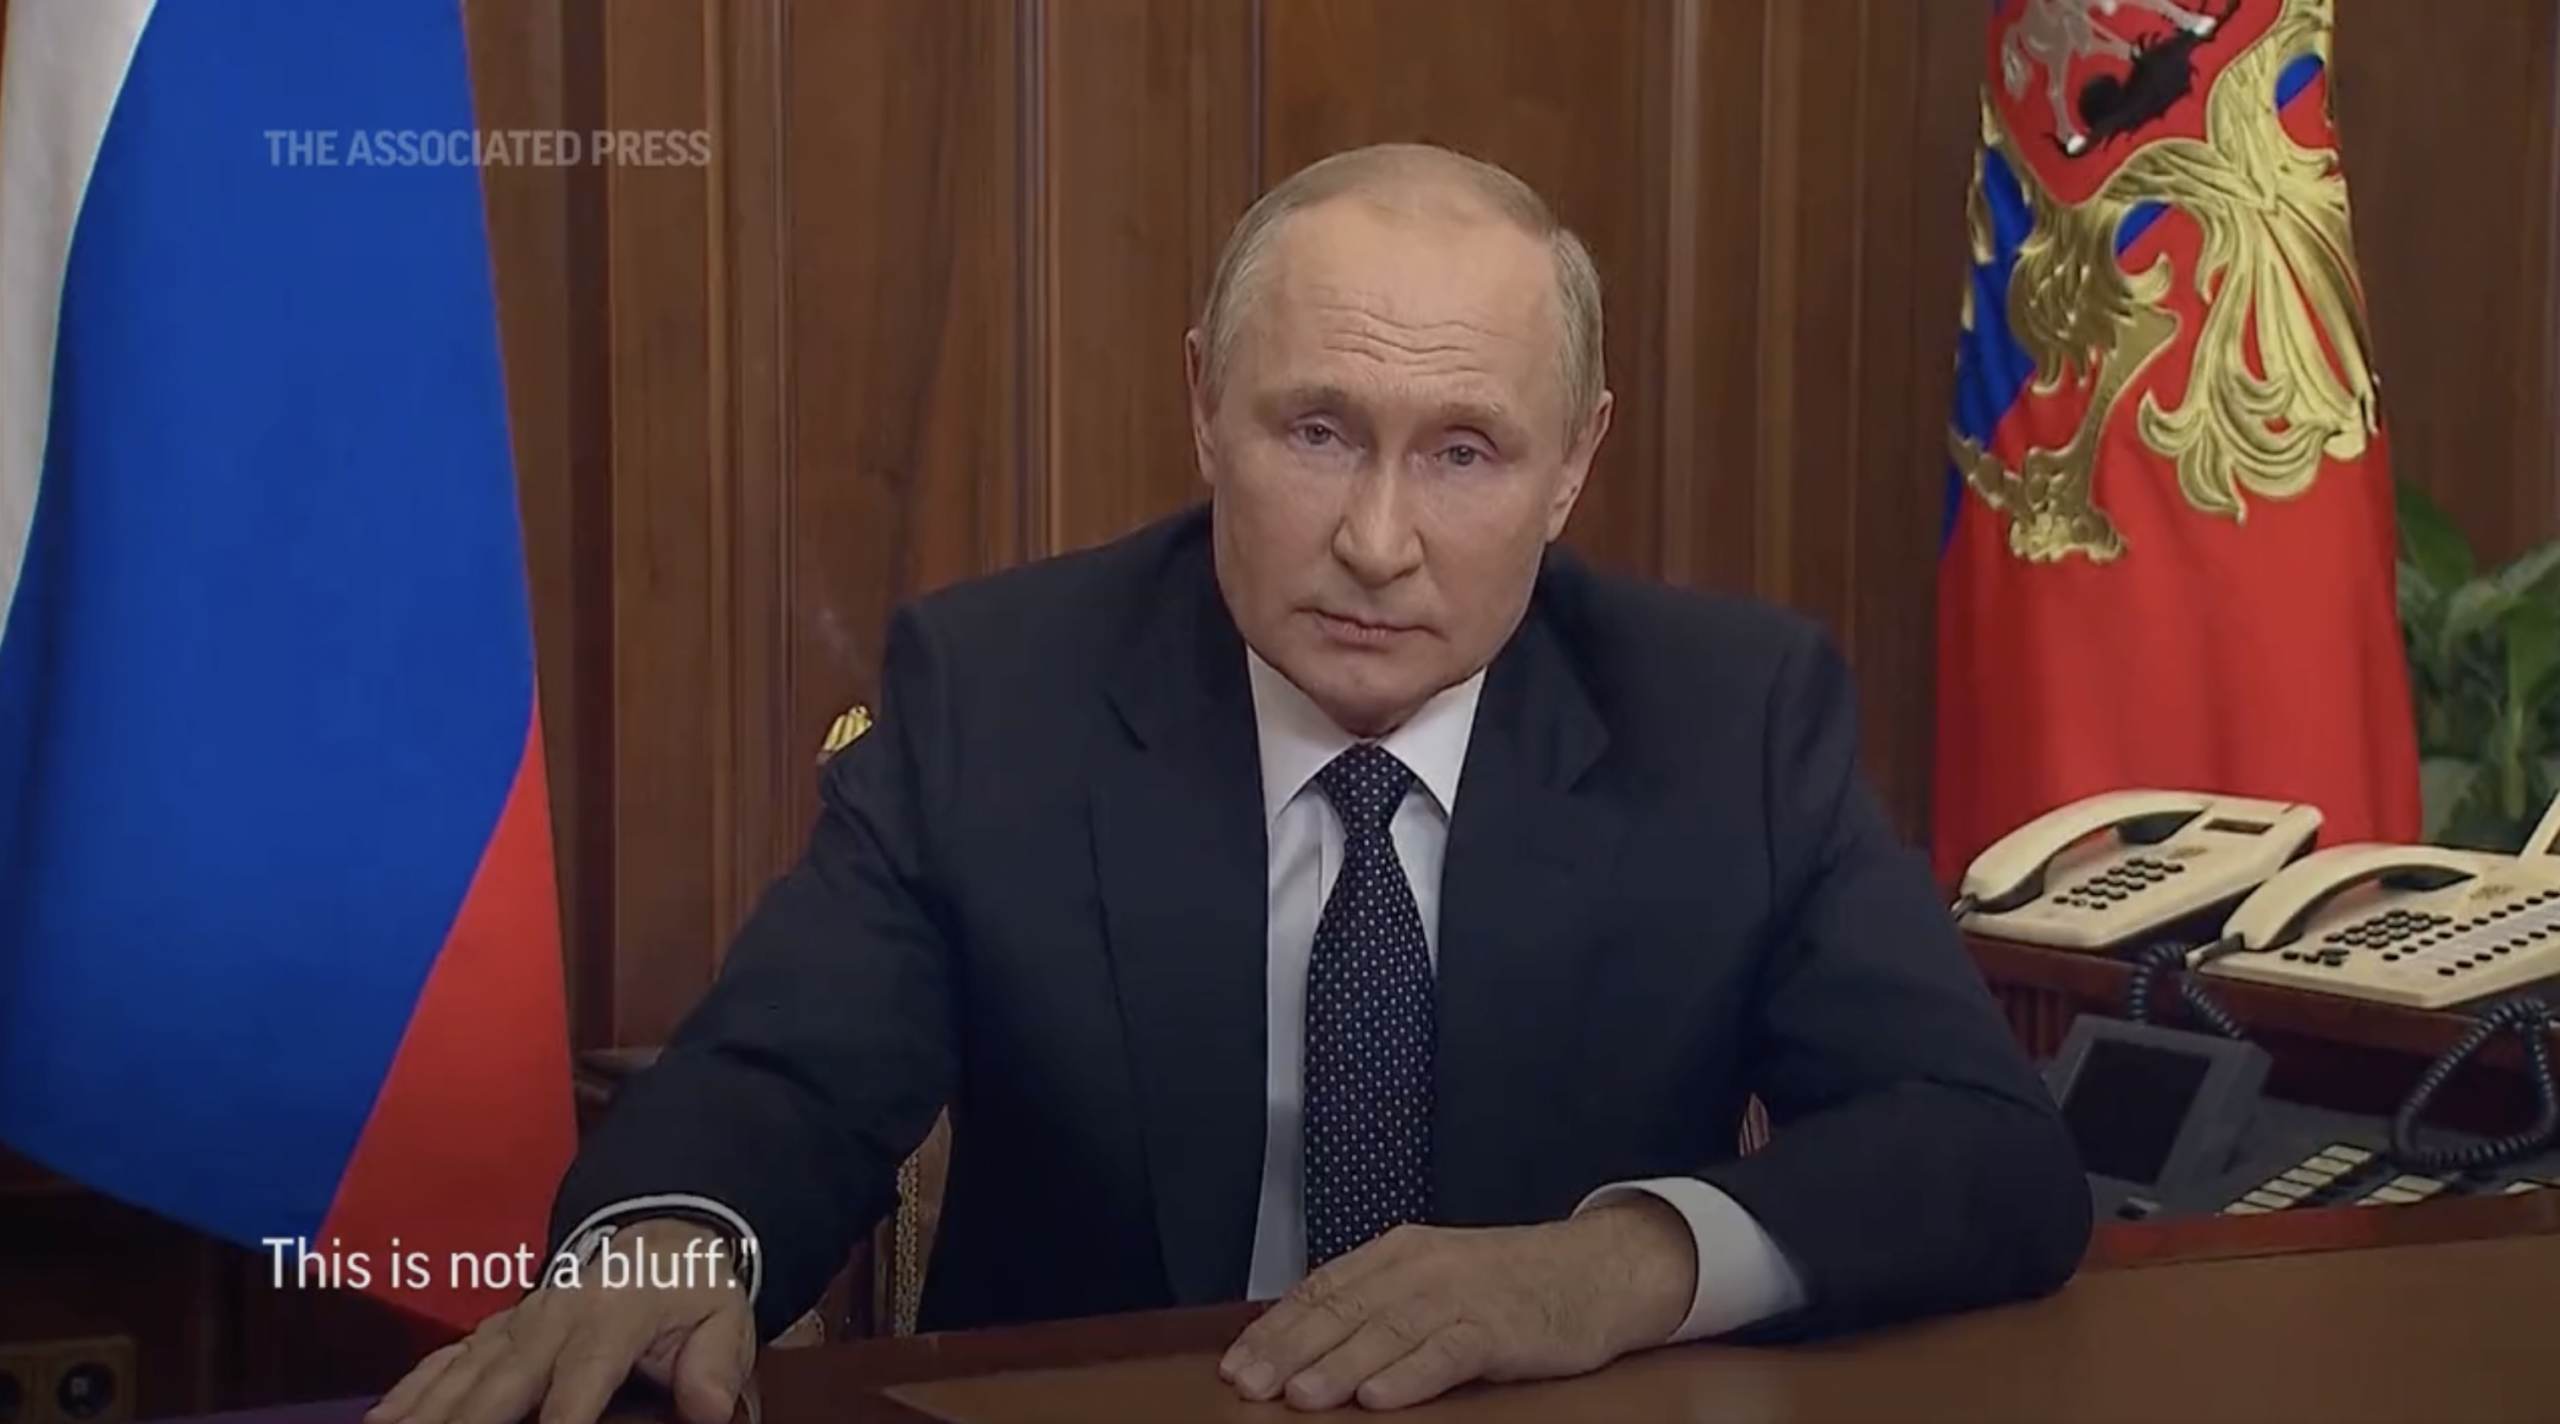 Putin Warns West – His Nuclear Threat “Is Not a Bluff” (VIDEO)